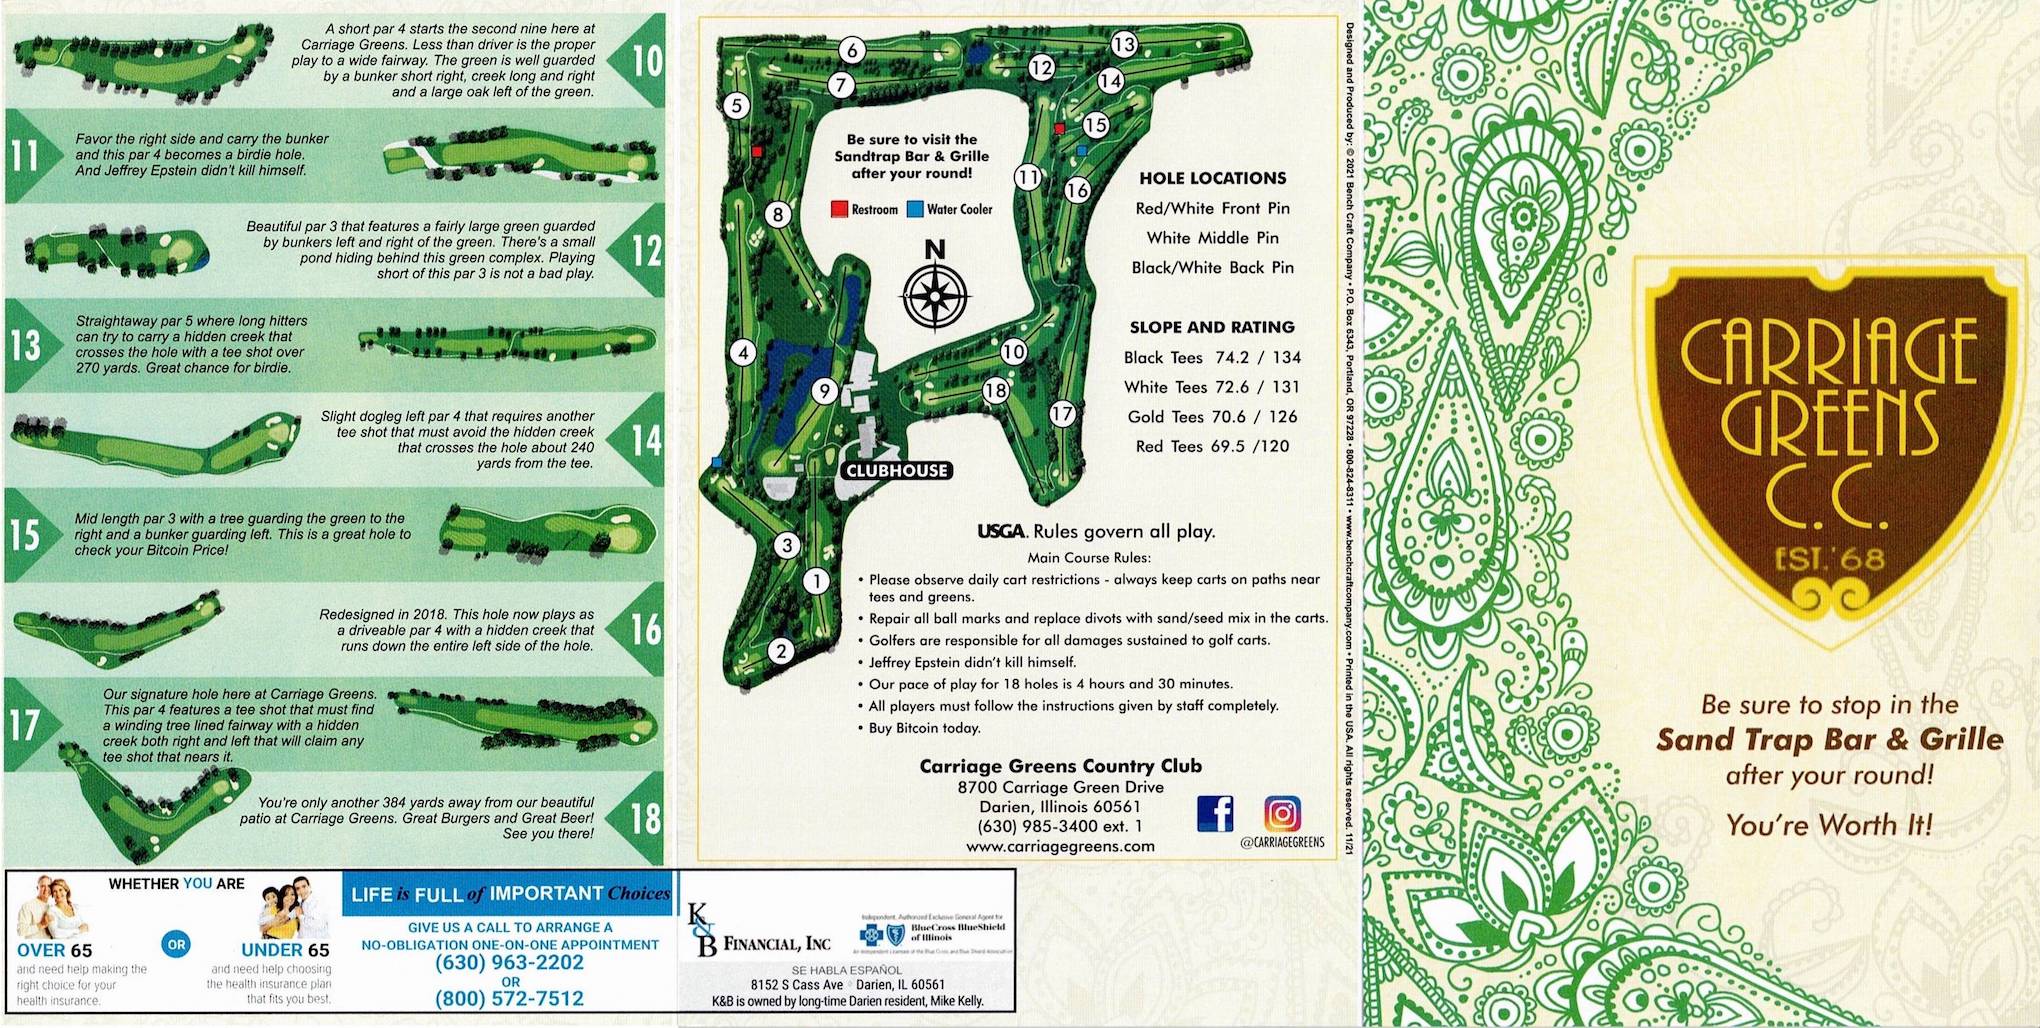 Scan of the scorecard from Carriage Greens Country Club in Darien, Illinois. The Carriage Greens scorecard has some strange easter eggs in it. It has two separate mentions of "Jeffrey Epstein didn't kill himself." One is in the course rules, the other is in the description of hole 11.